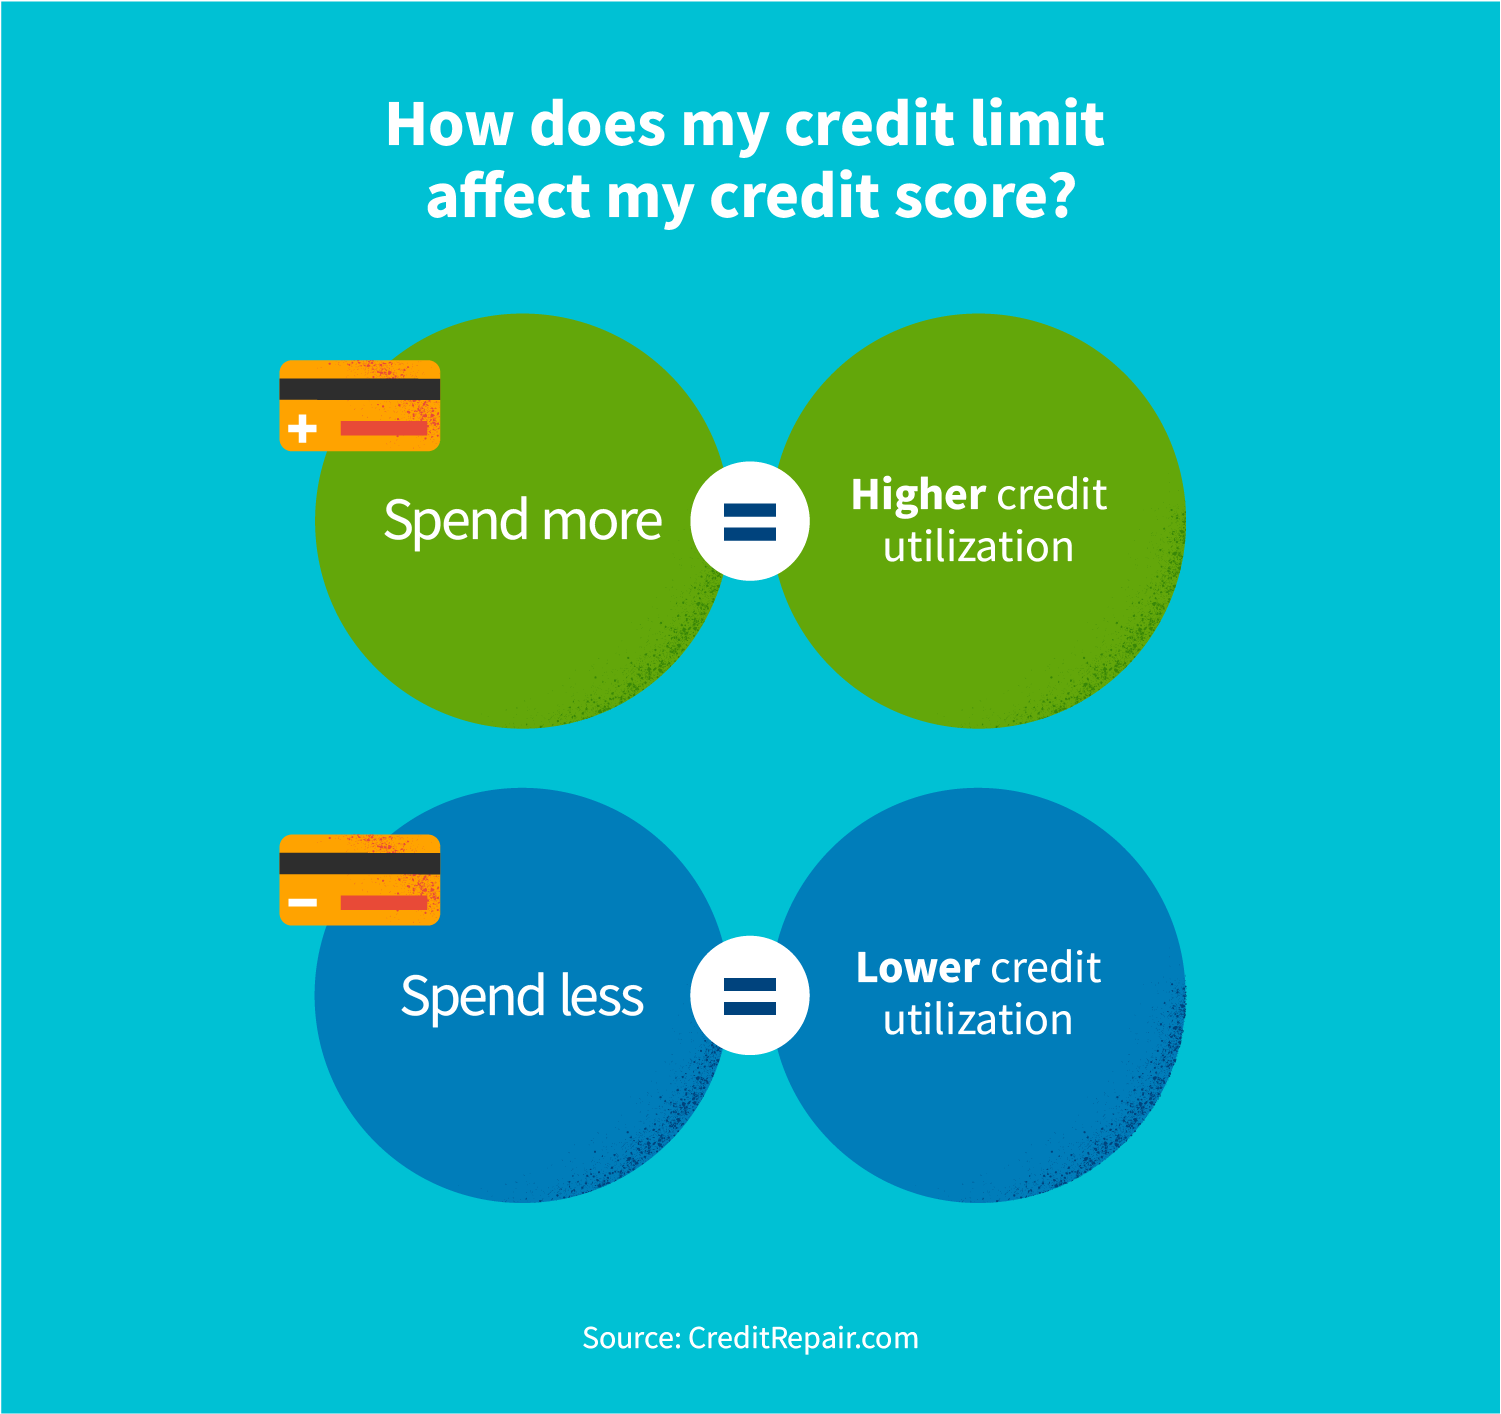 How does my credit limit affect my credit score?